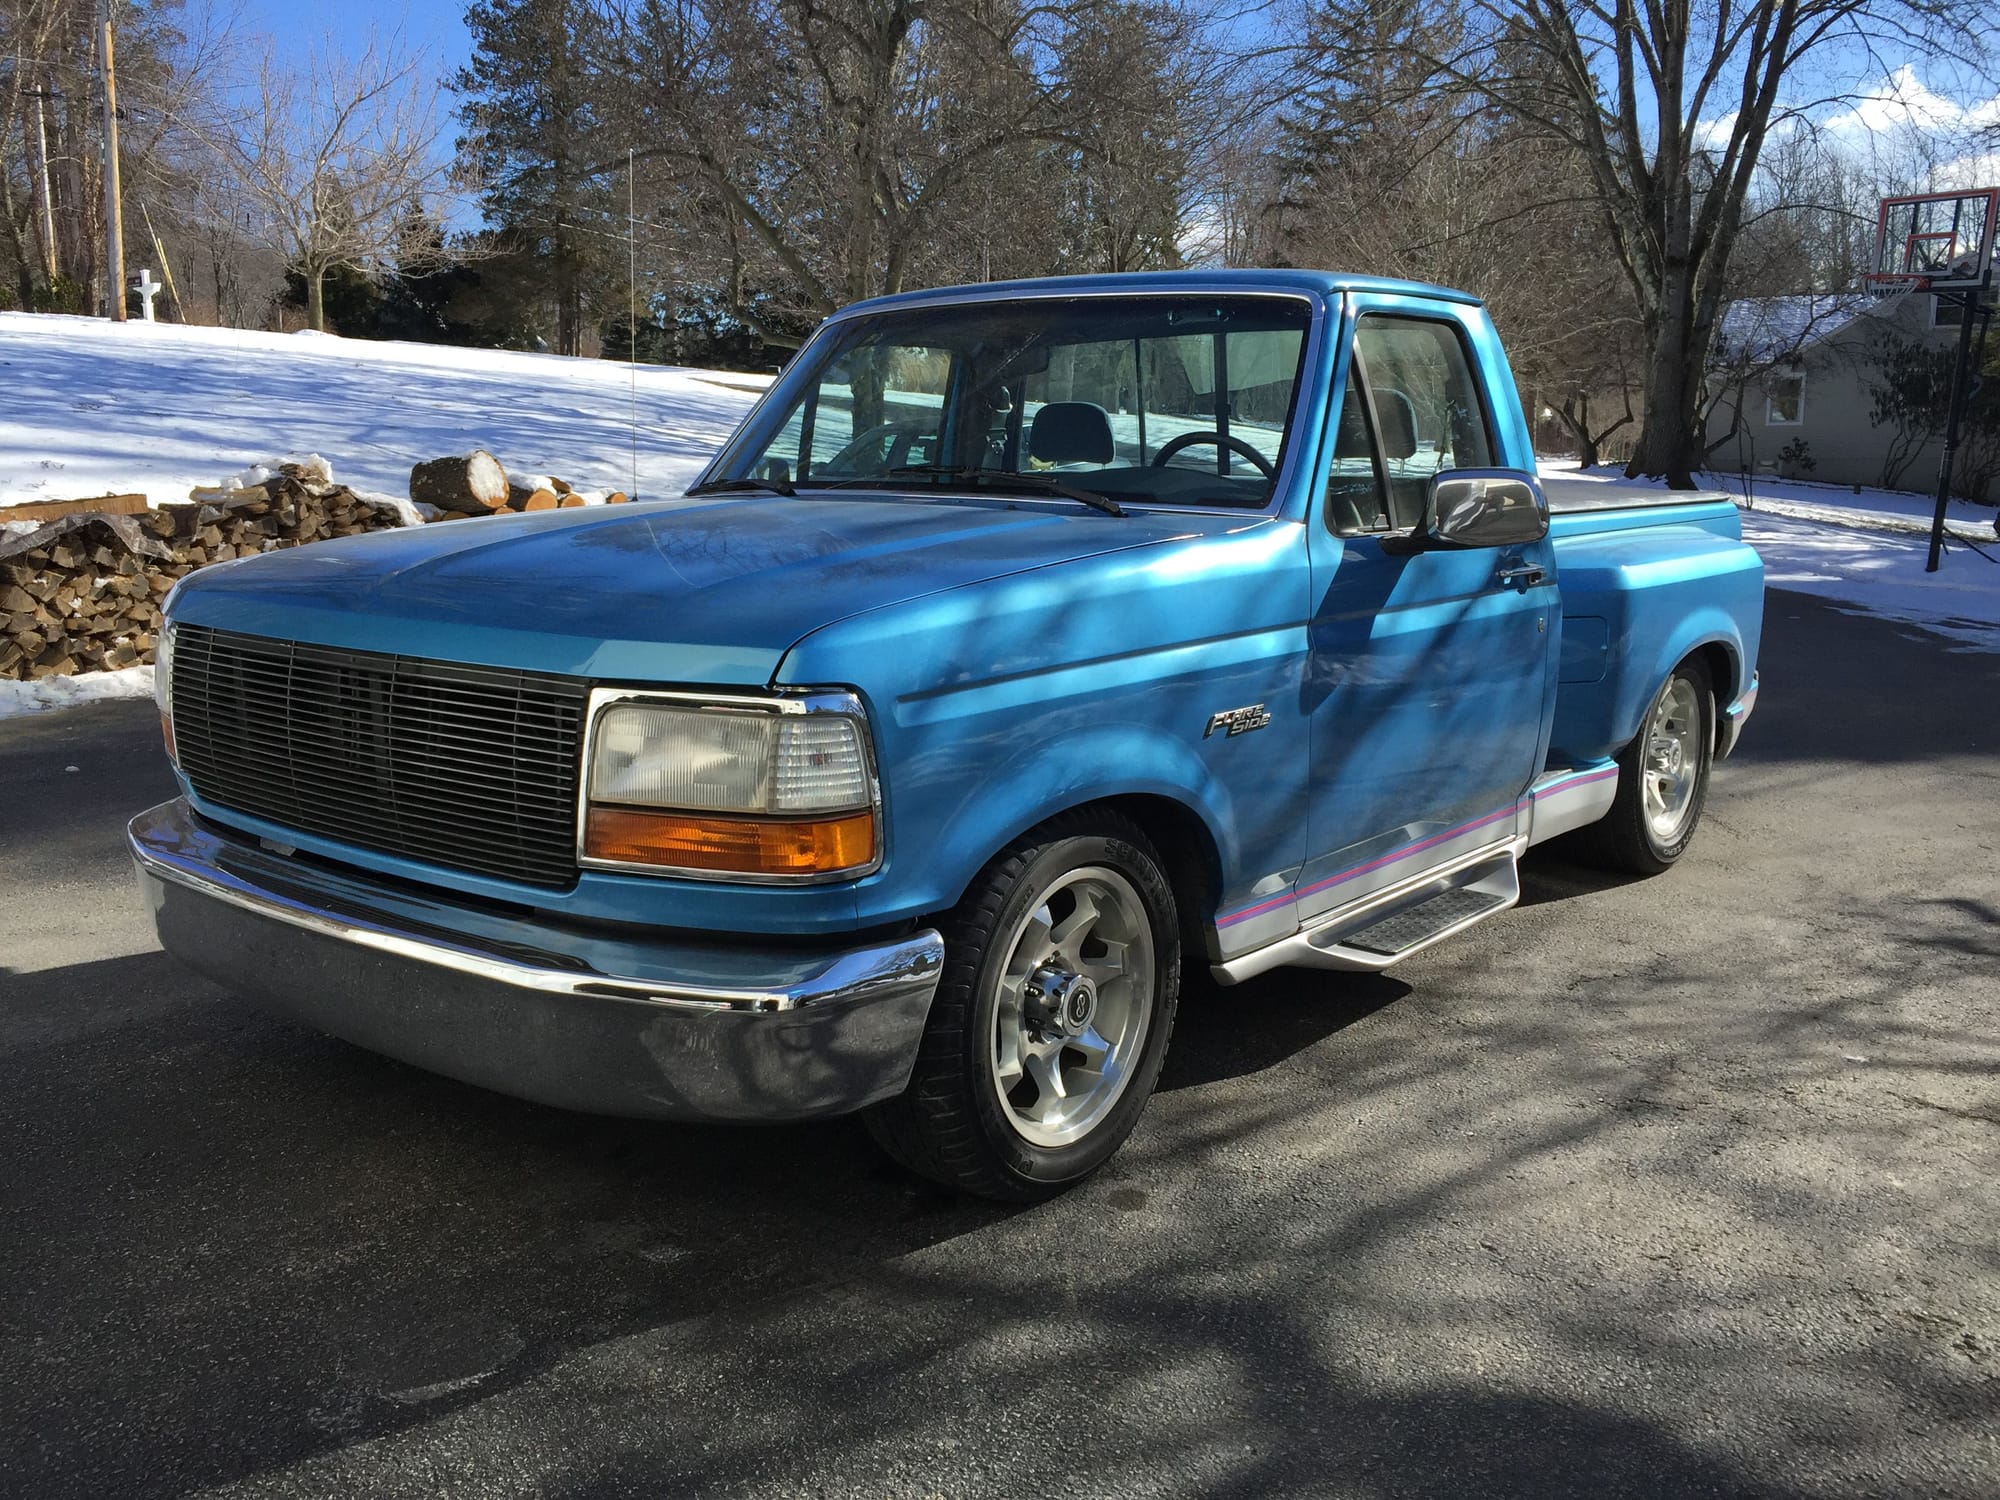 New To Me Lowered 92 Flairside Advice Please Ford F150 Forum.